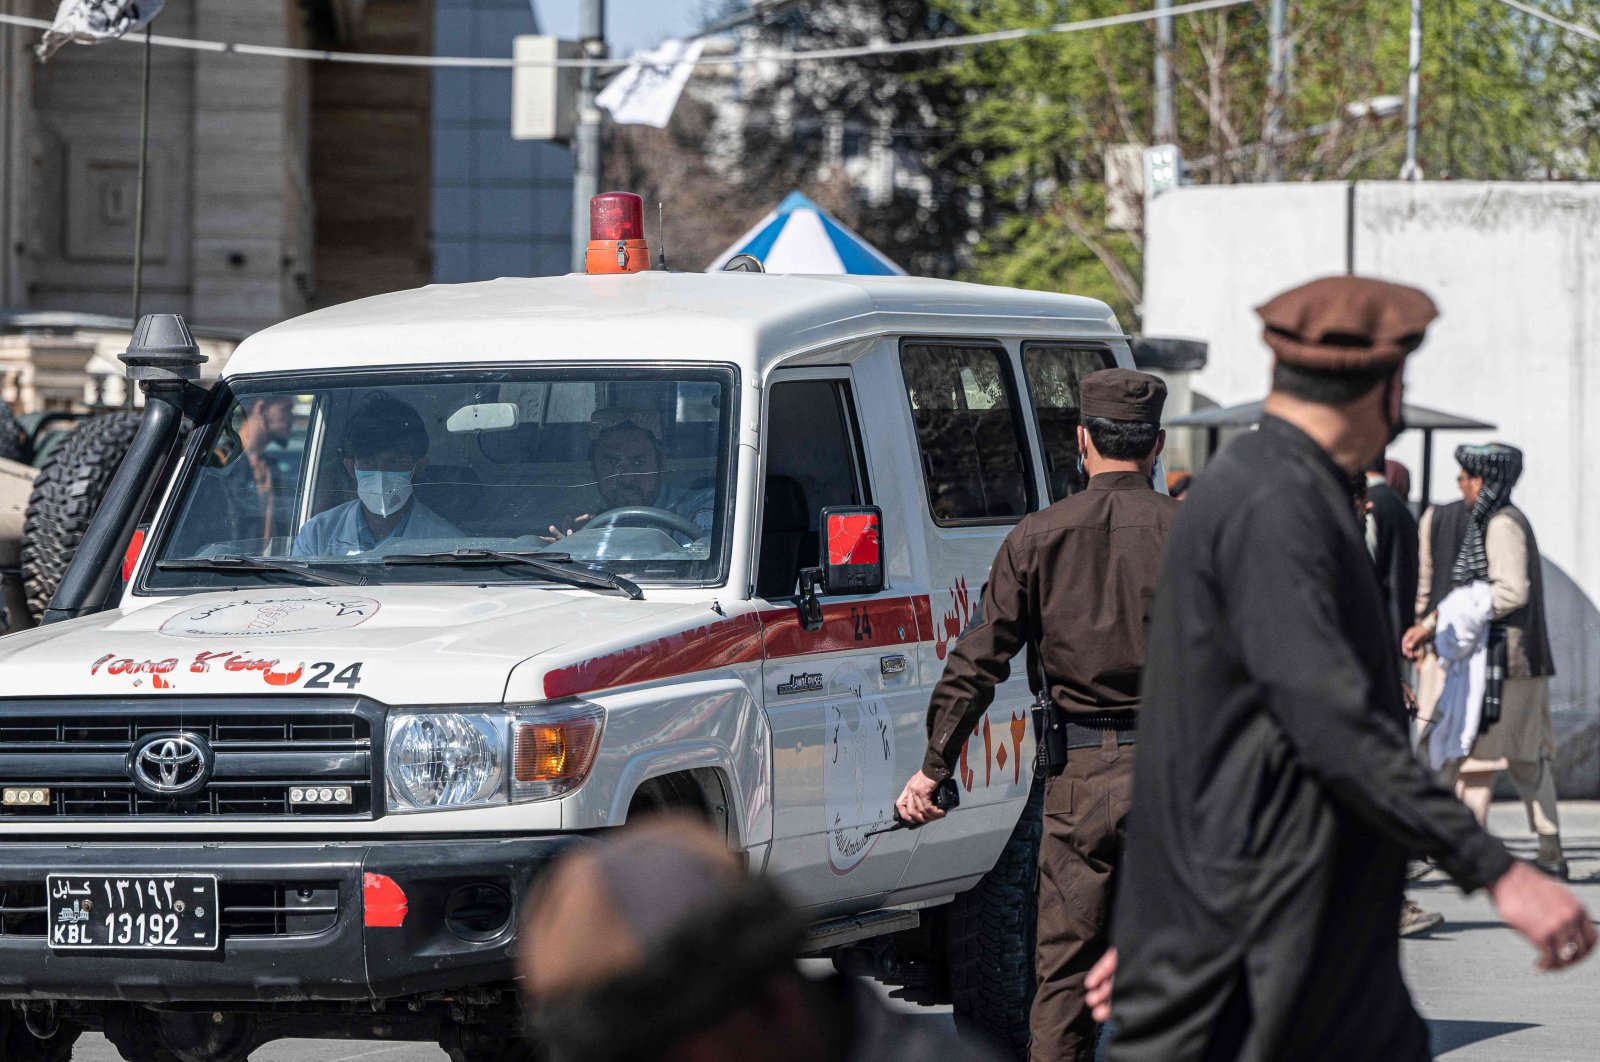 An ambulance carries victims from near the site of a bomb attack in Kabul, Afghanistan, March 27, 2023. (AFP Photo)